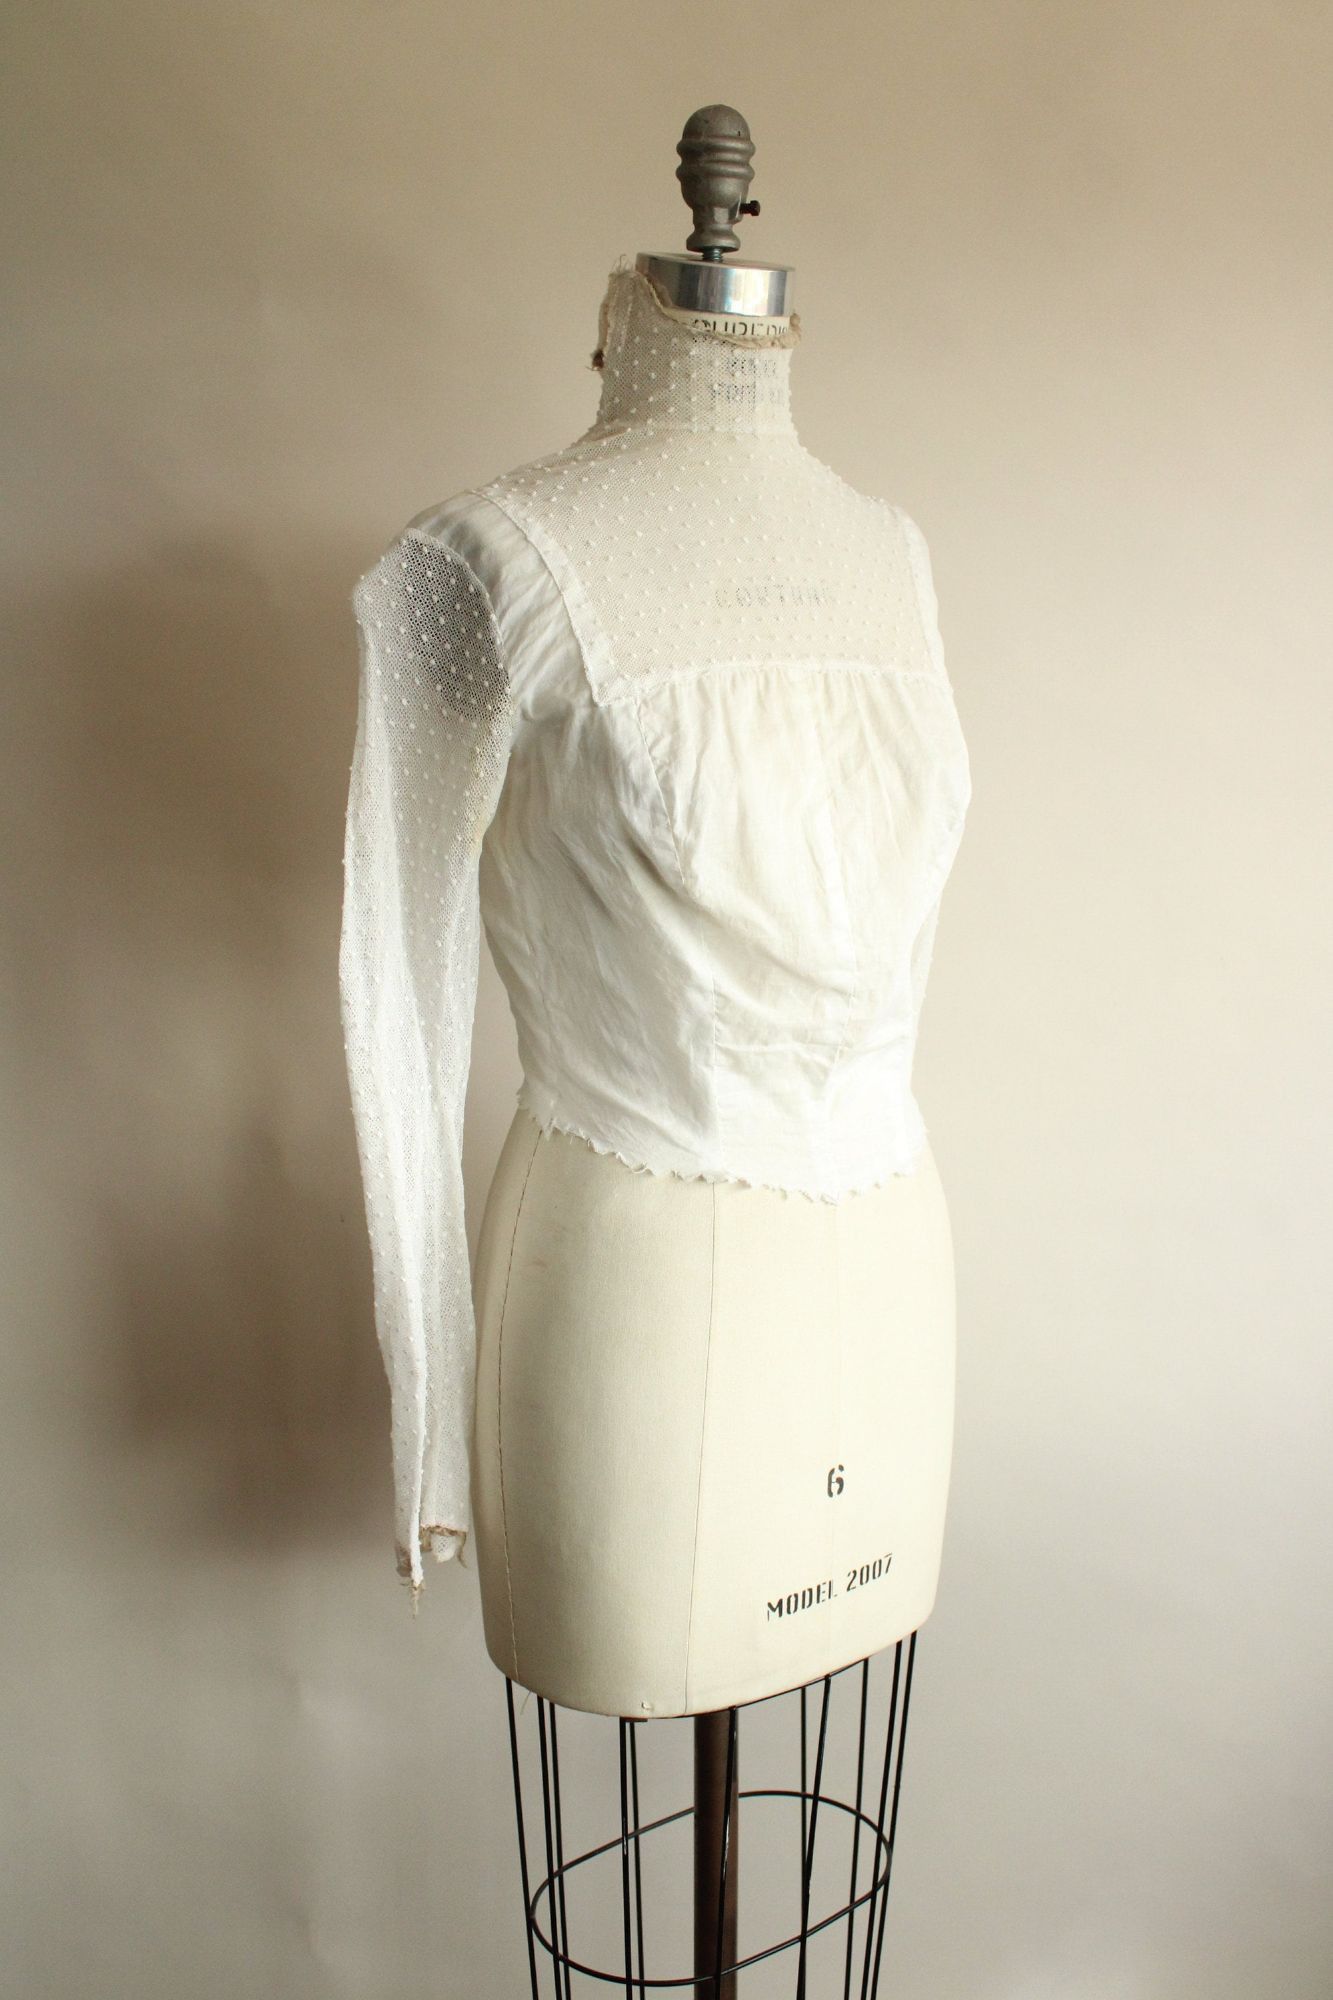 Vintage Antique 1900s Blouse In White With Lace Front. Pigeon Bust Size M / US 6-8 / IT 42-44 - 5 Thumbnail